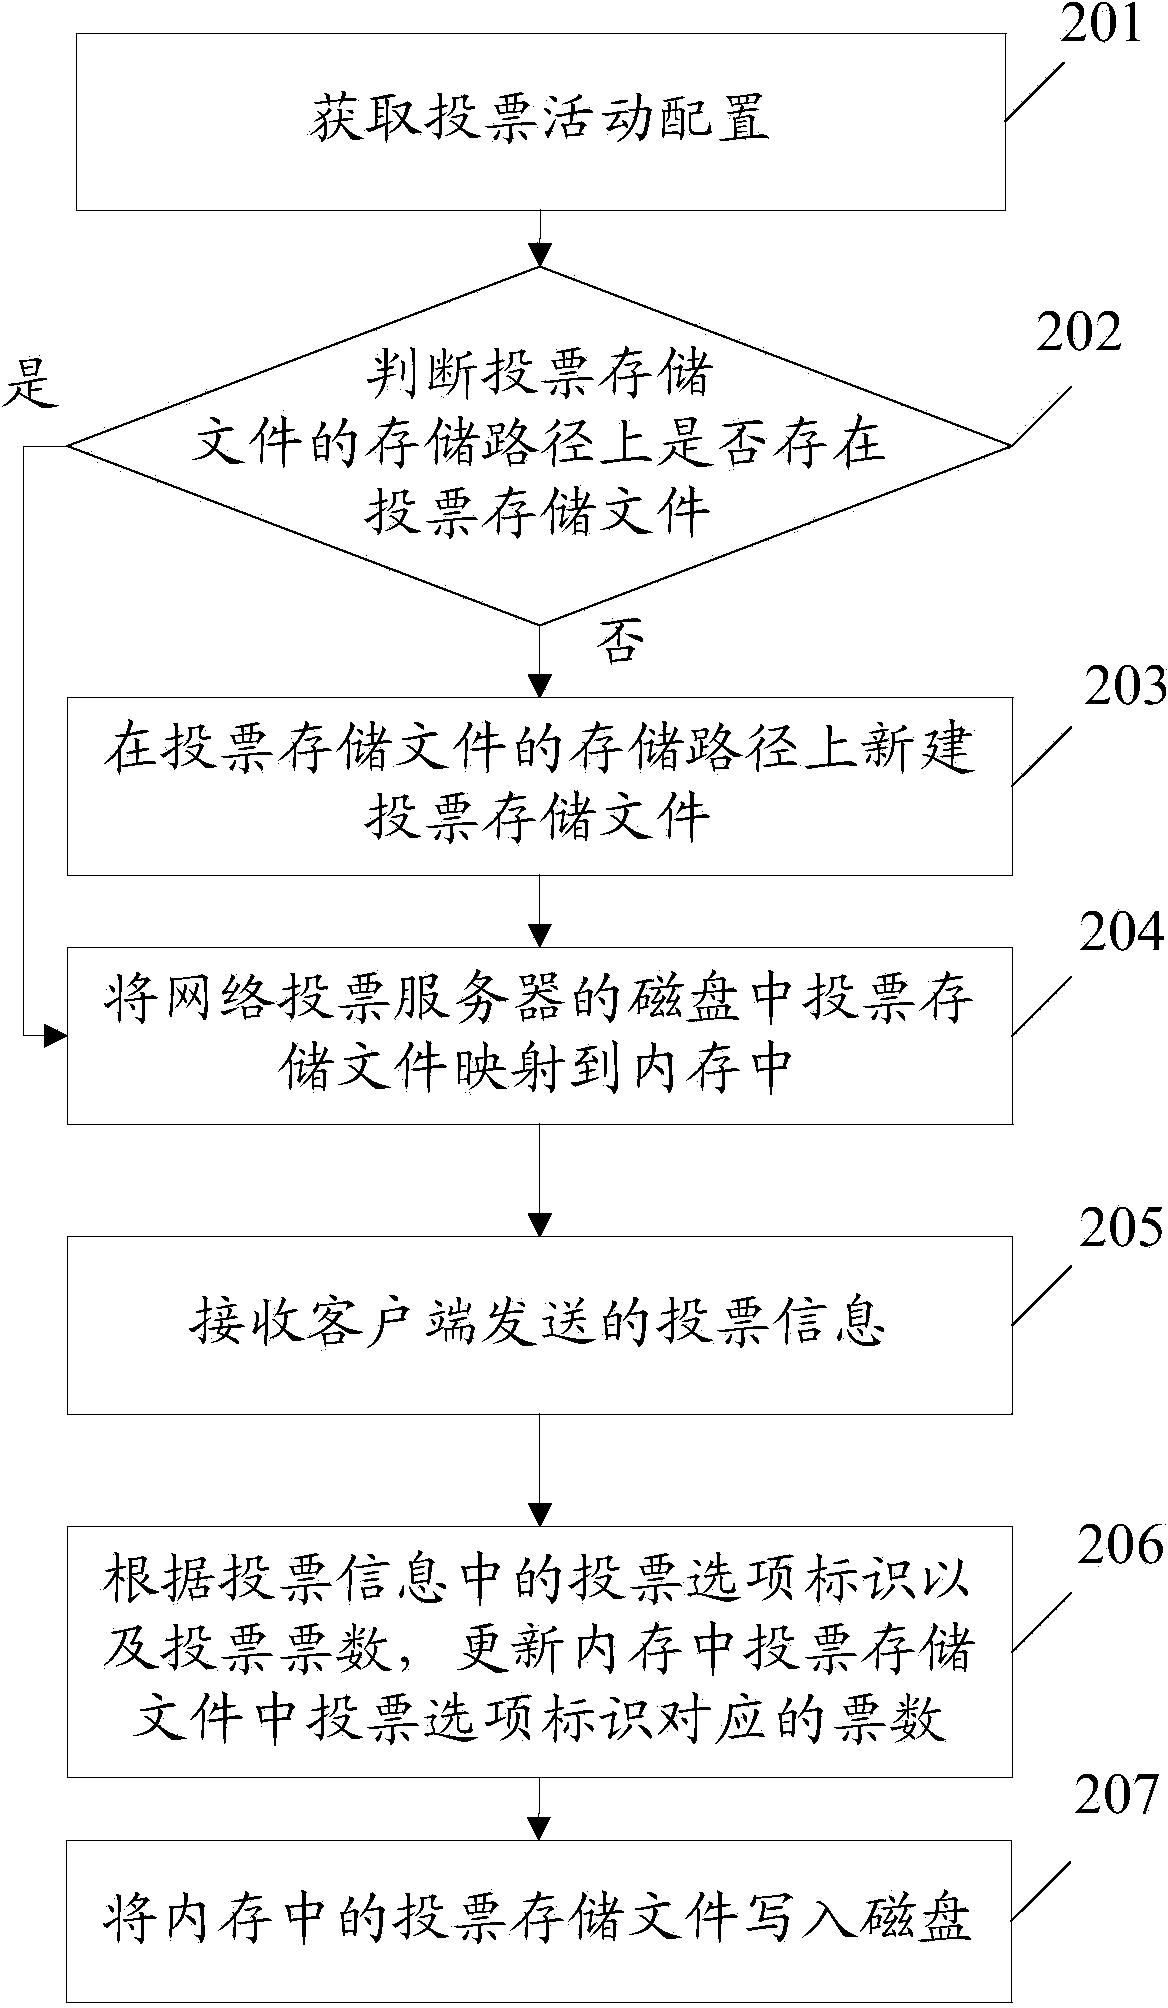 Network voting data storage method and device